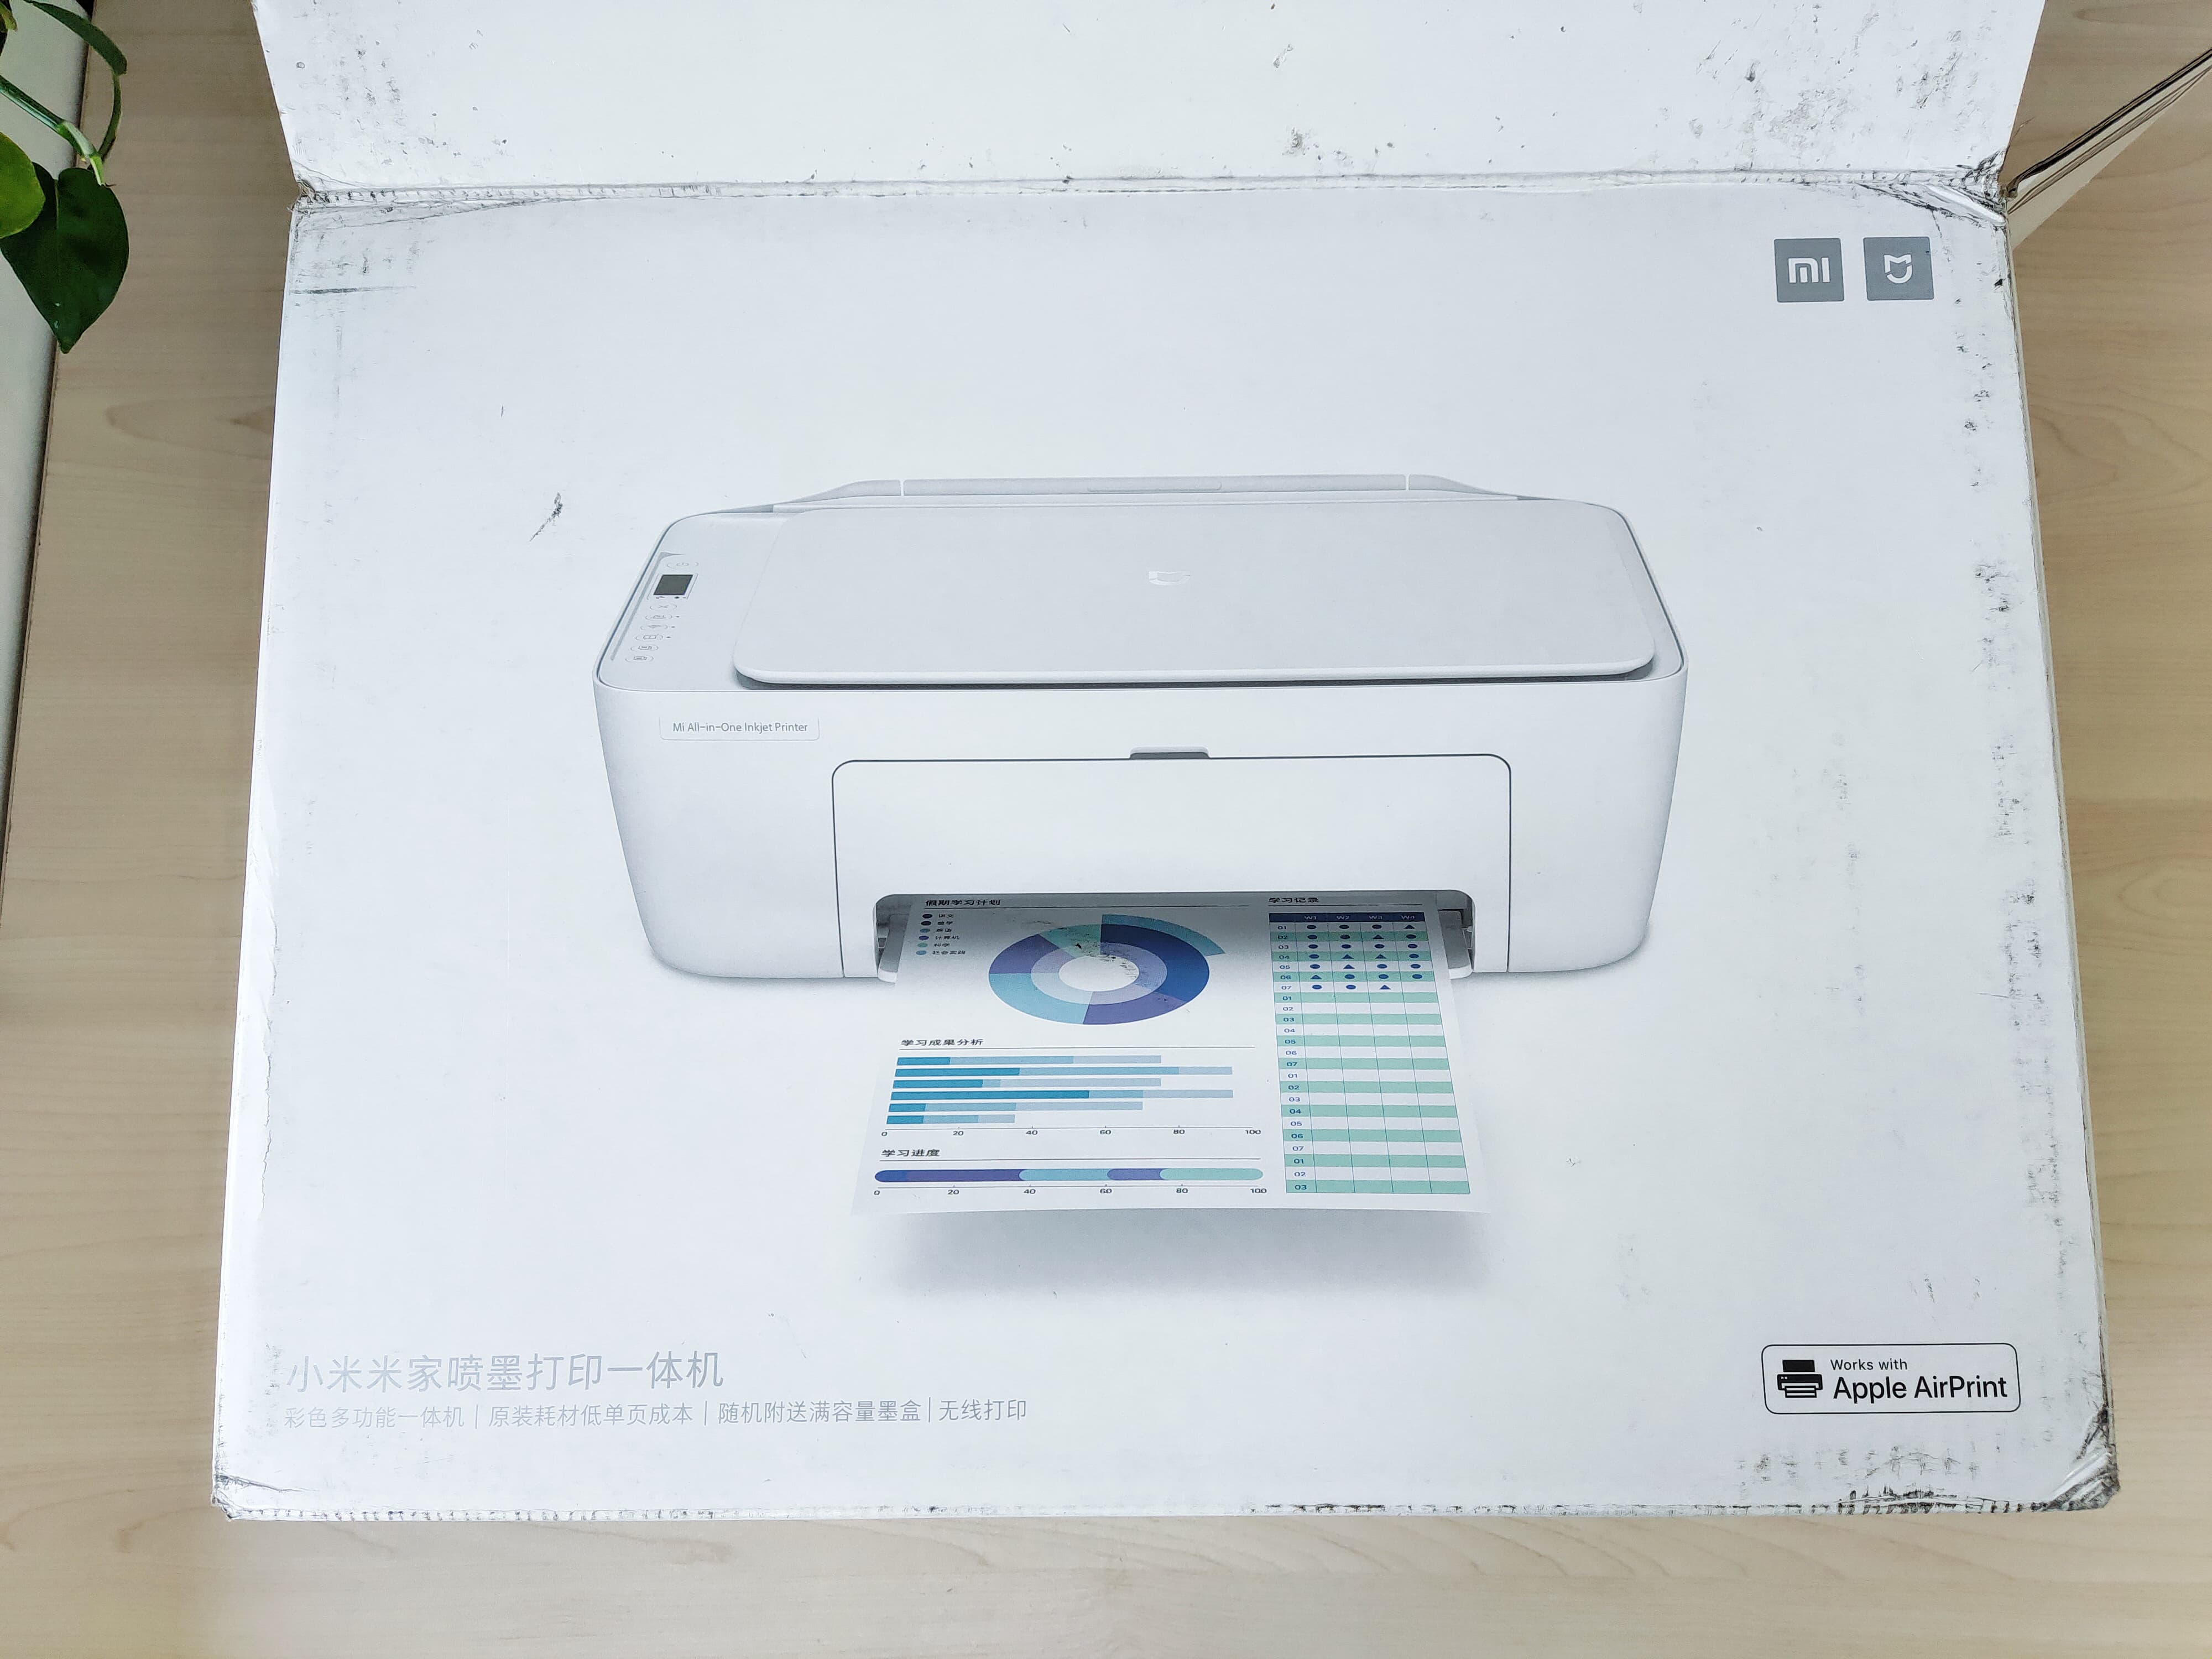 Mijia inkjet printing all-in-one machine out of the box: inkjet printing anytime, anywhere